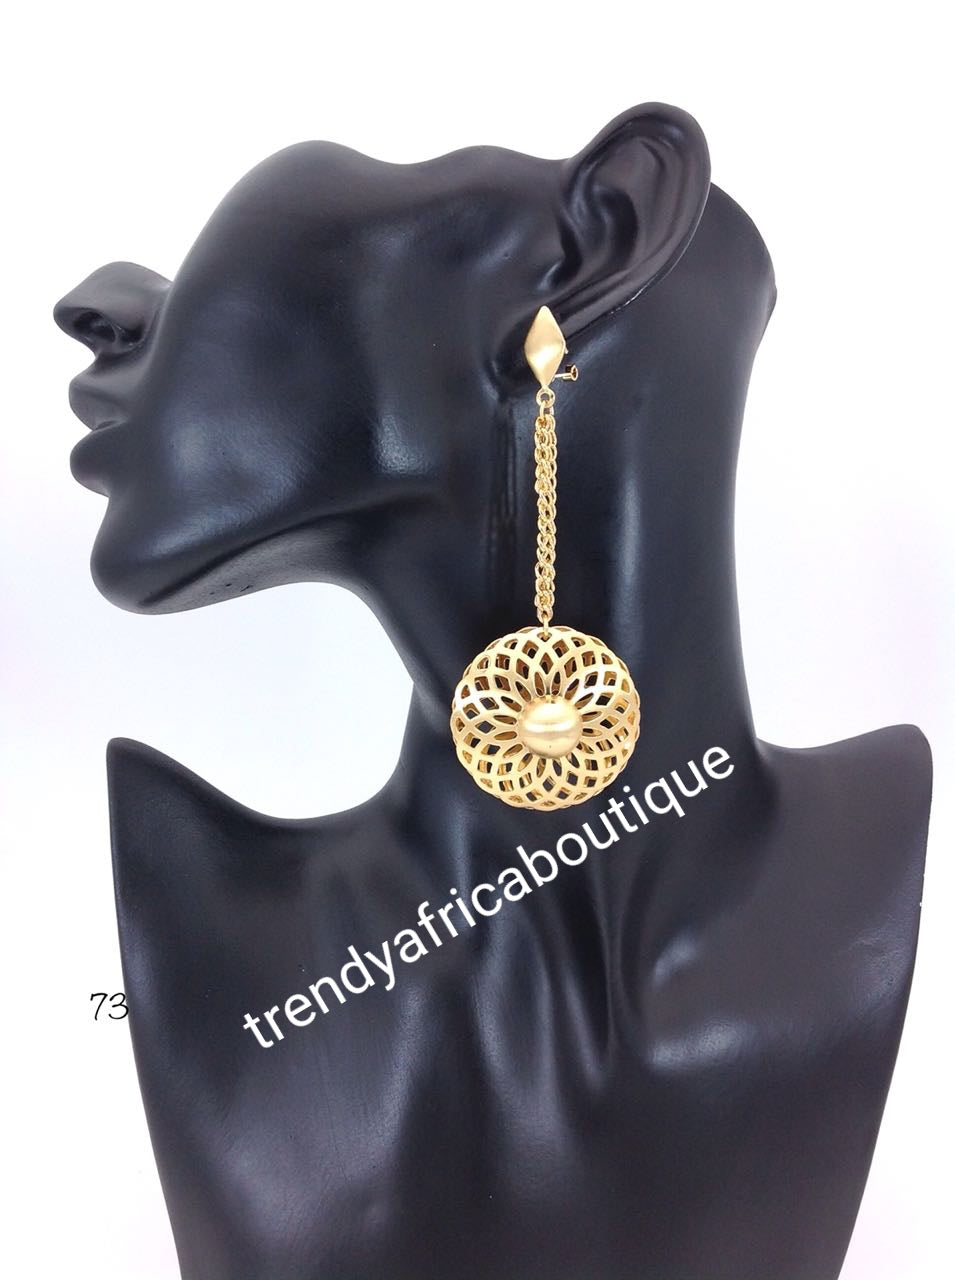 Latest drop-earrings in 18k Gold electroplating. Top quality made hypoallergenic. Long lasting. Light weight earrings